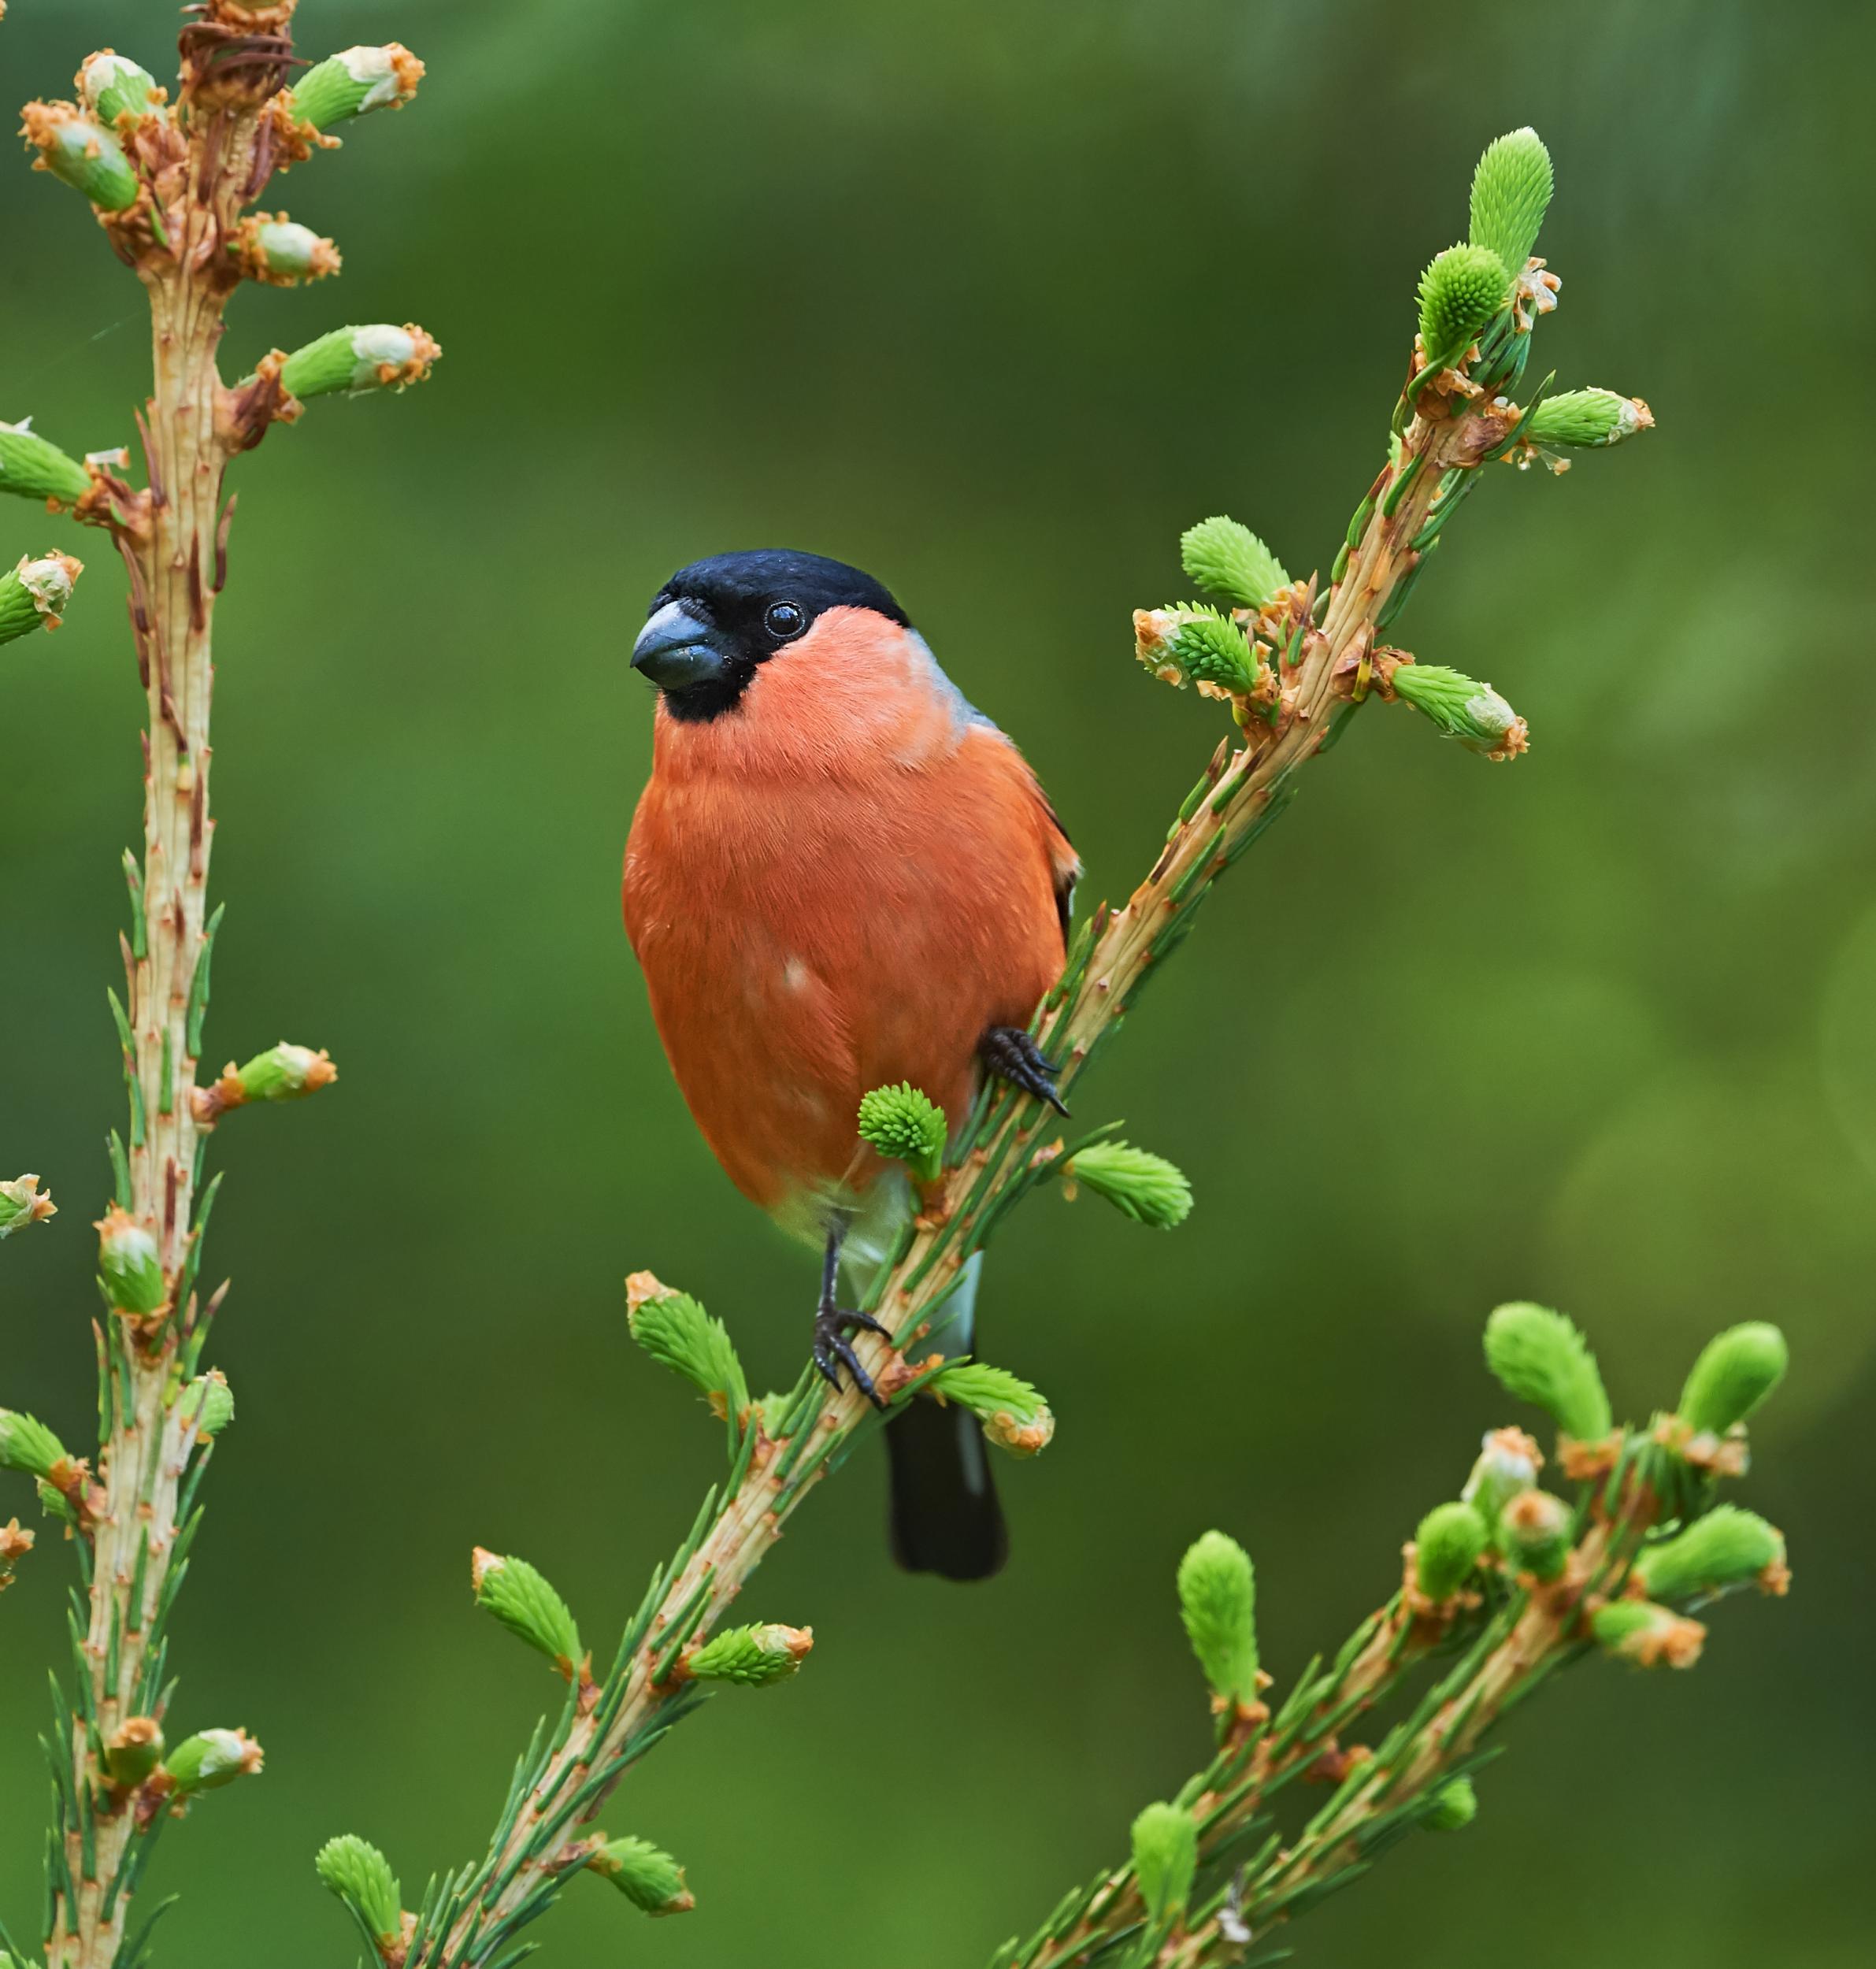 Bullfinches are on the RSPB’s amber conservation list